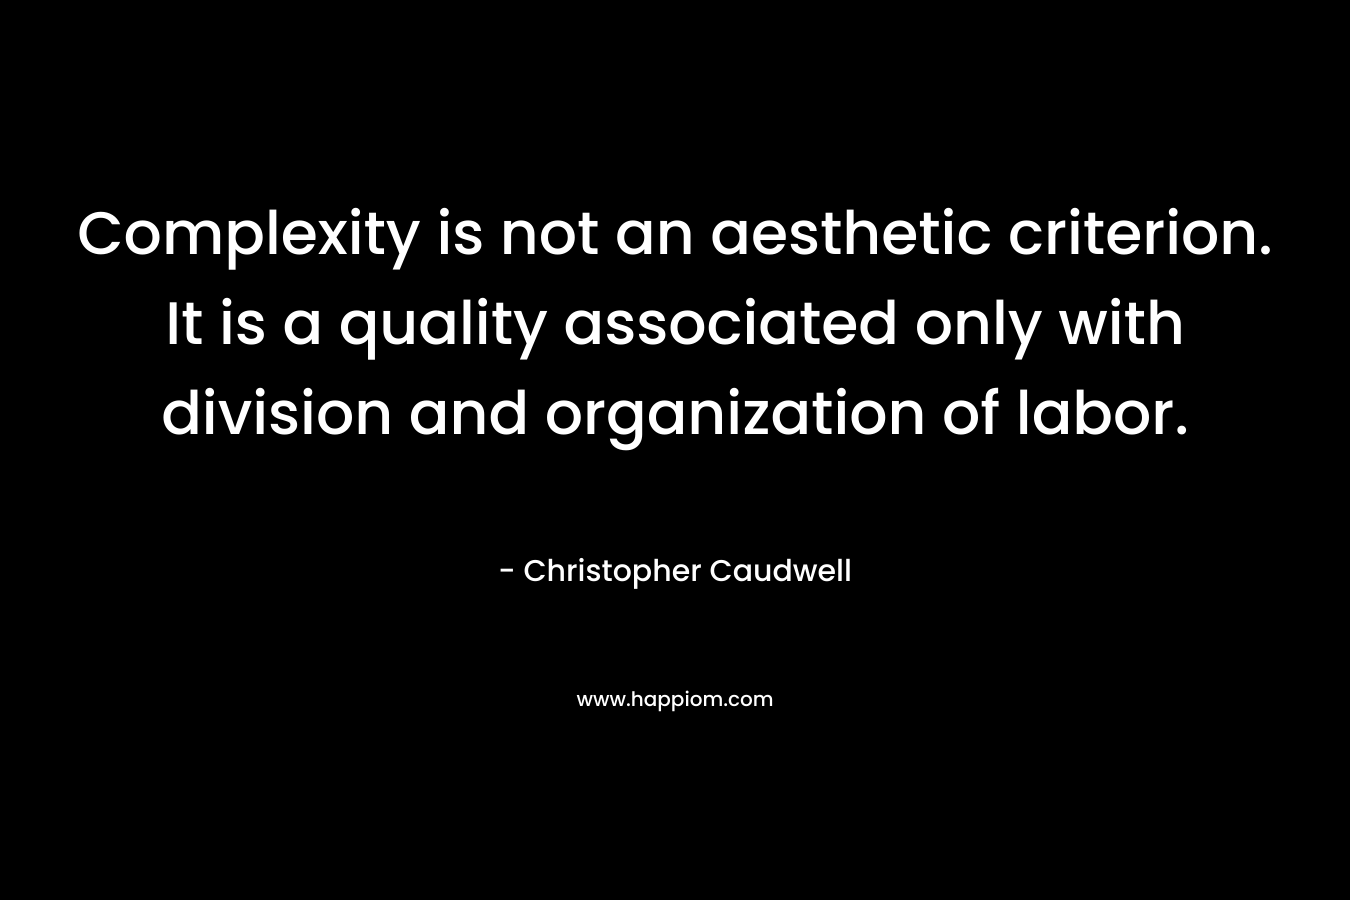 Complexity is not an aesthetic criterion. It is a quality associated only with division and organization of labor. – Christopher Caudwell